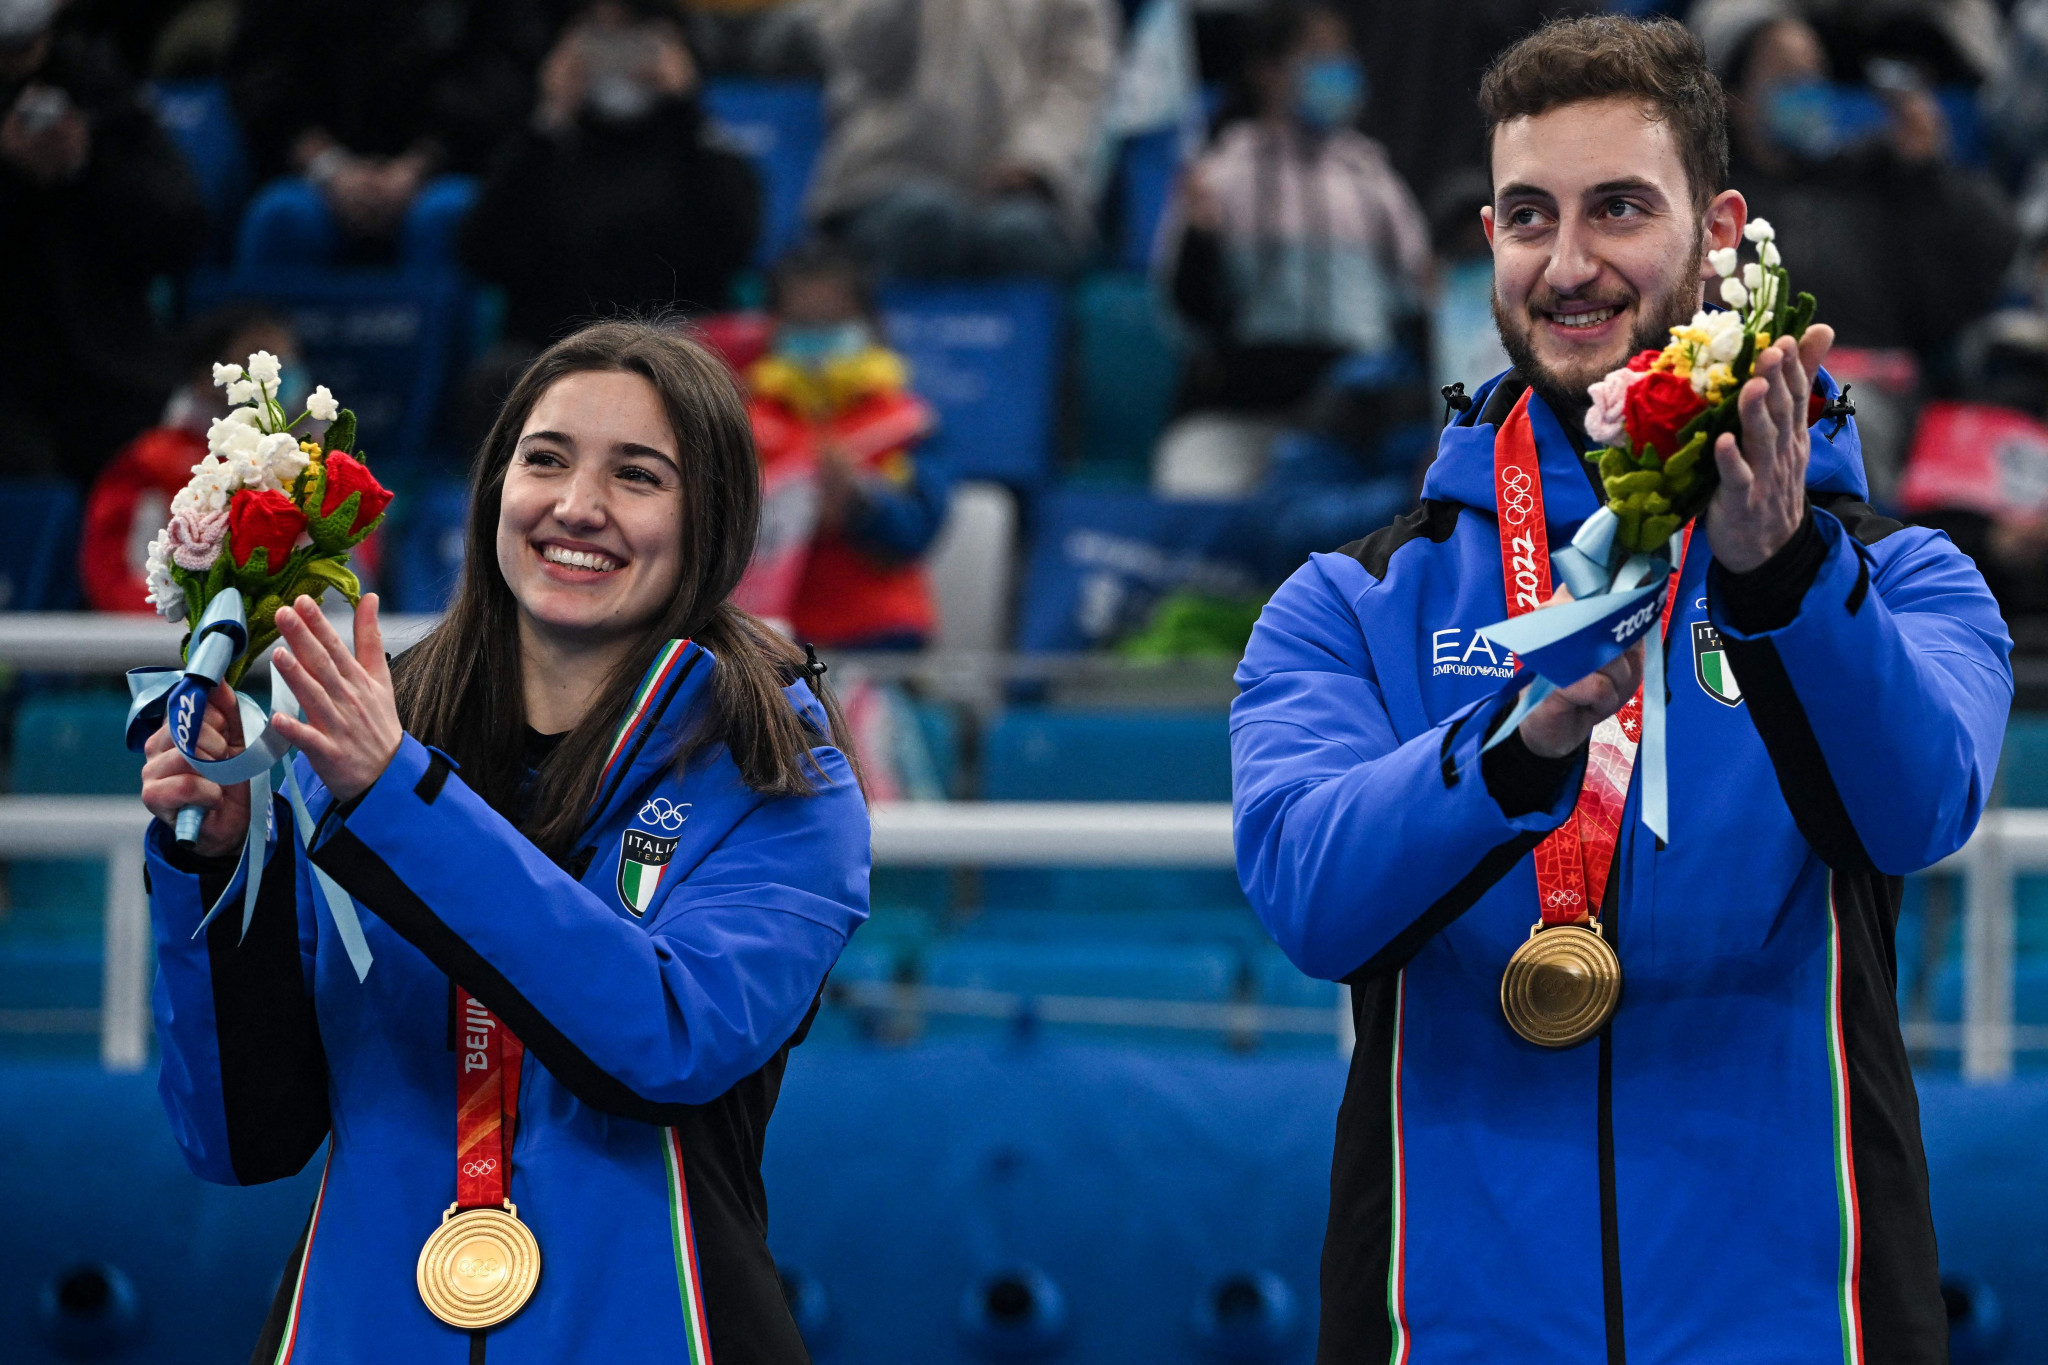 
Amos Mosaner, right, and Stefania Constantini won mixed doubles curling gold for Italy at Beijing 2022 ©Getty Images